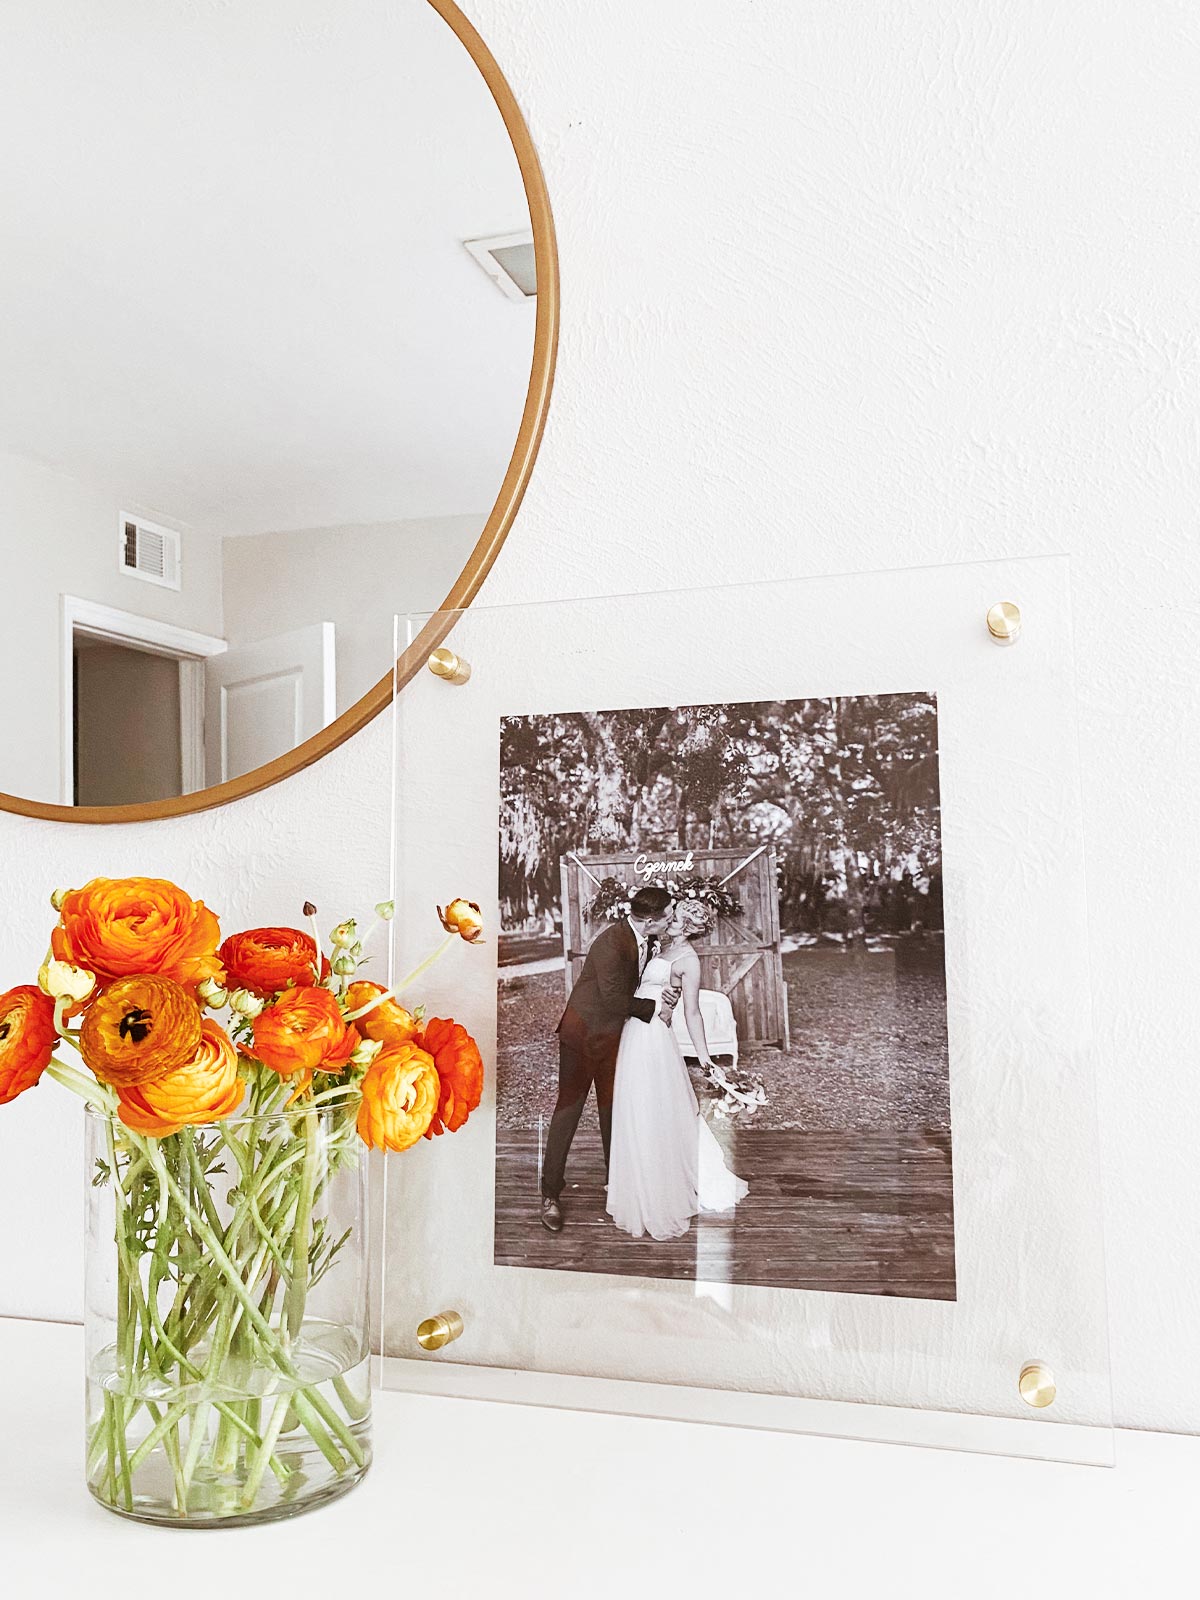 An Artifact Uprising Floating Frame featuring a wedding photo leaning against the wall on a dresser next to a brass mirror and summery bouquet